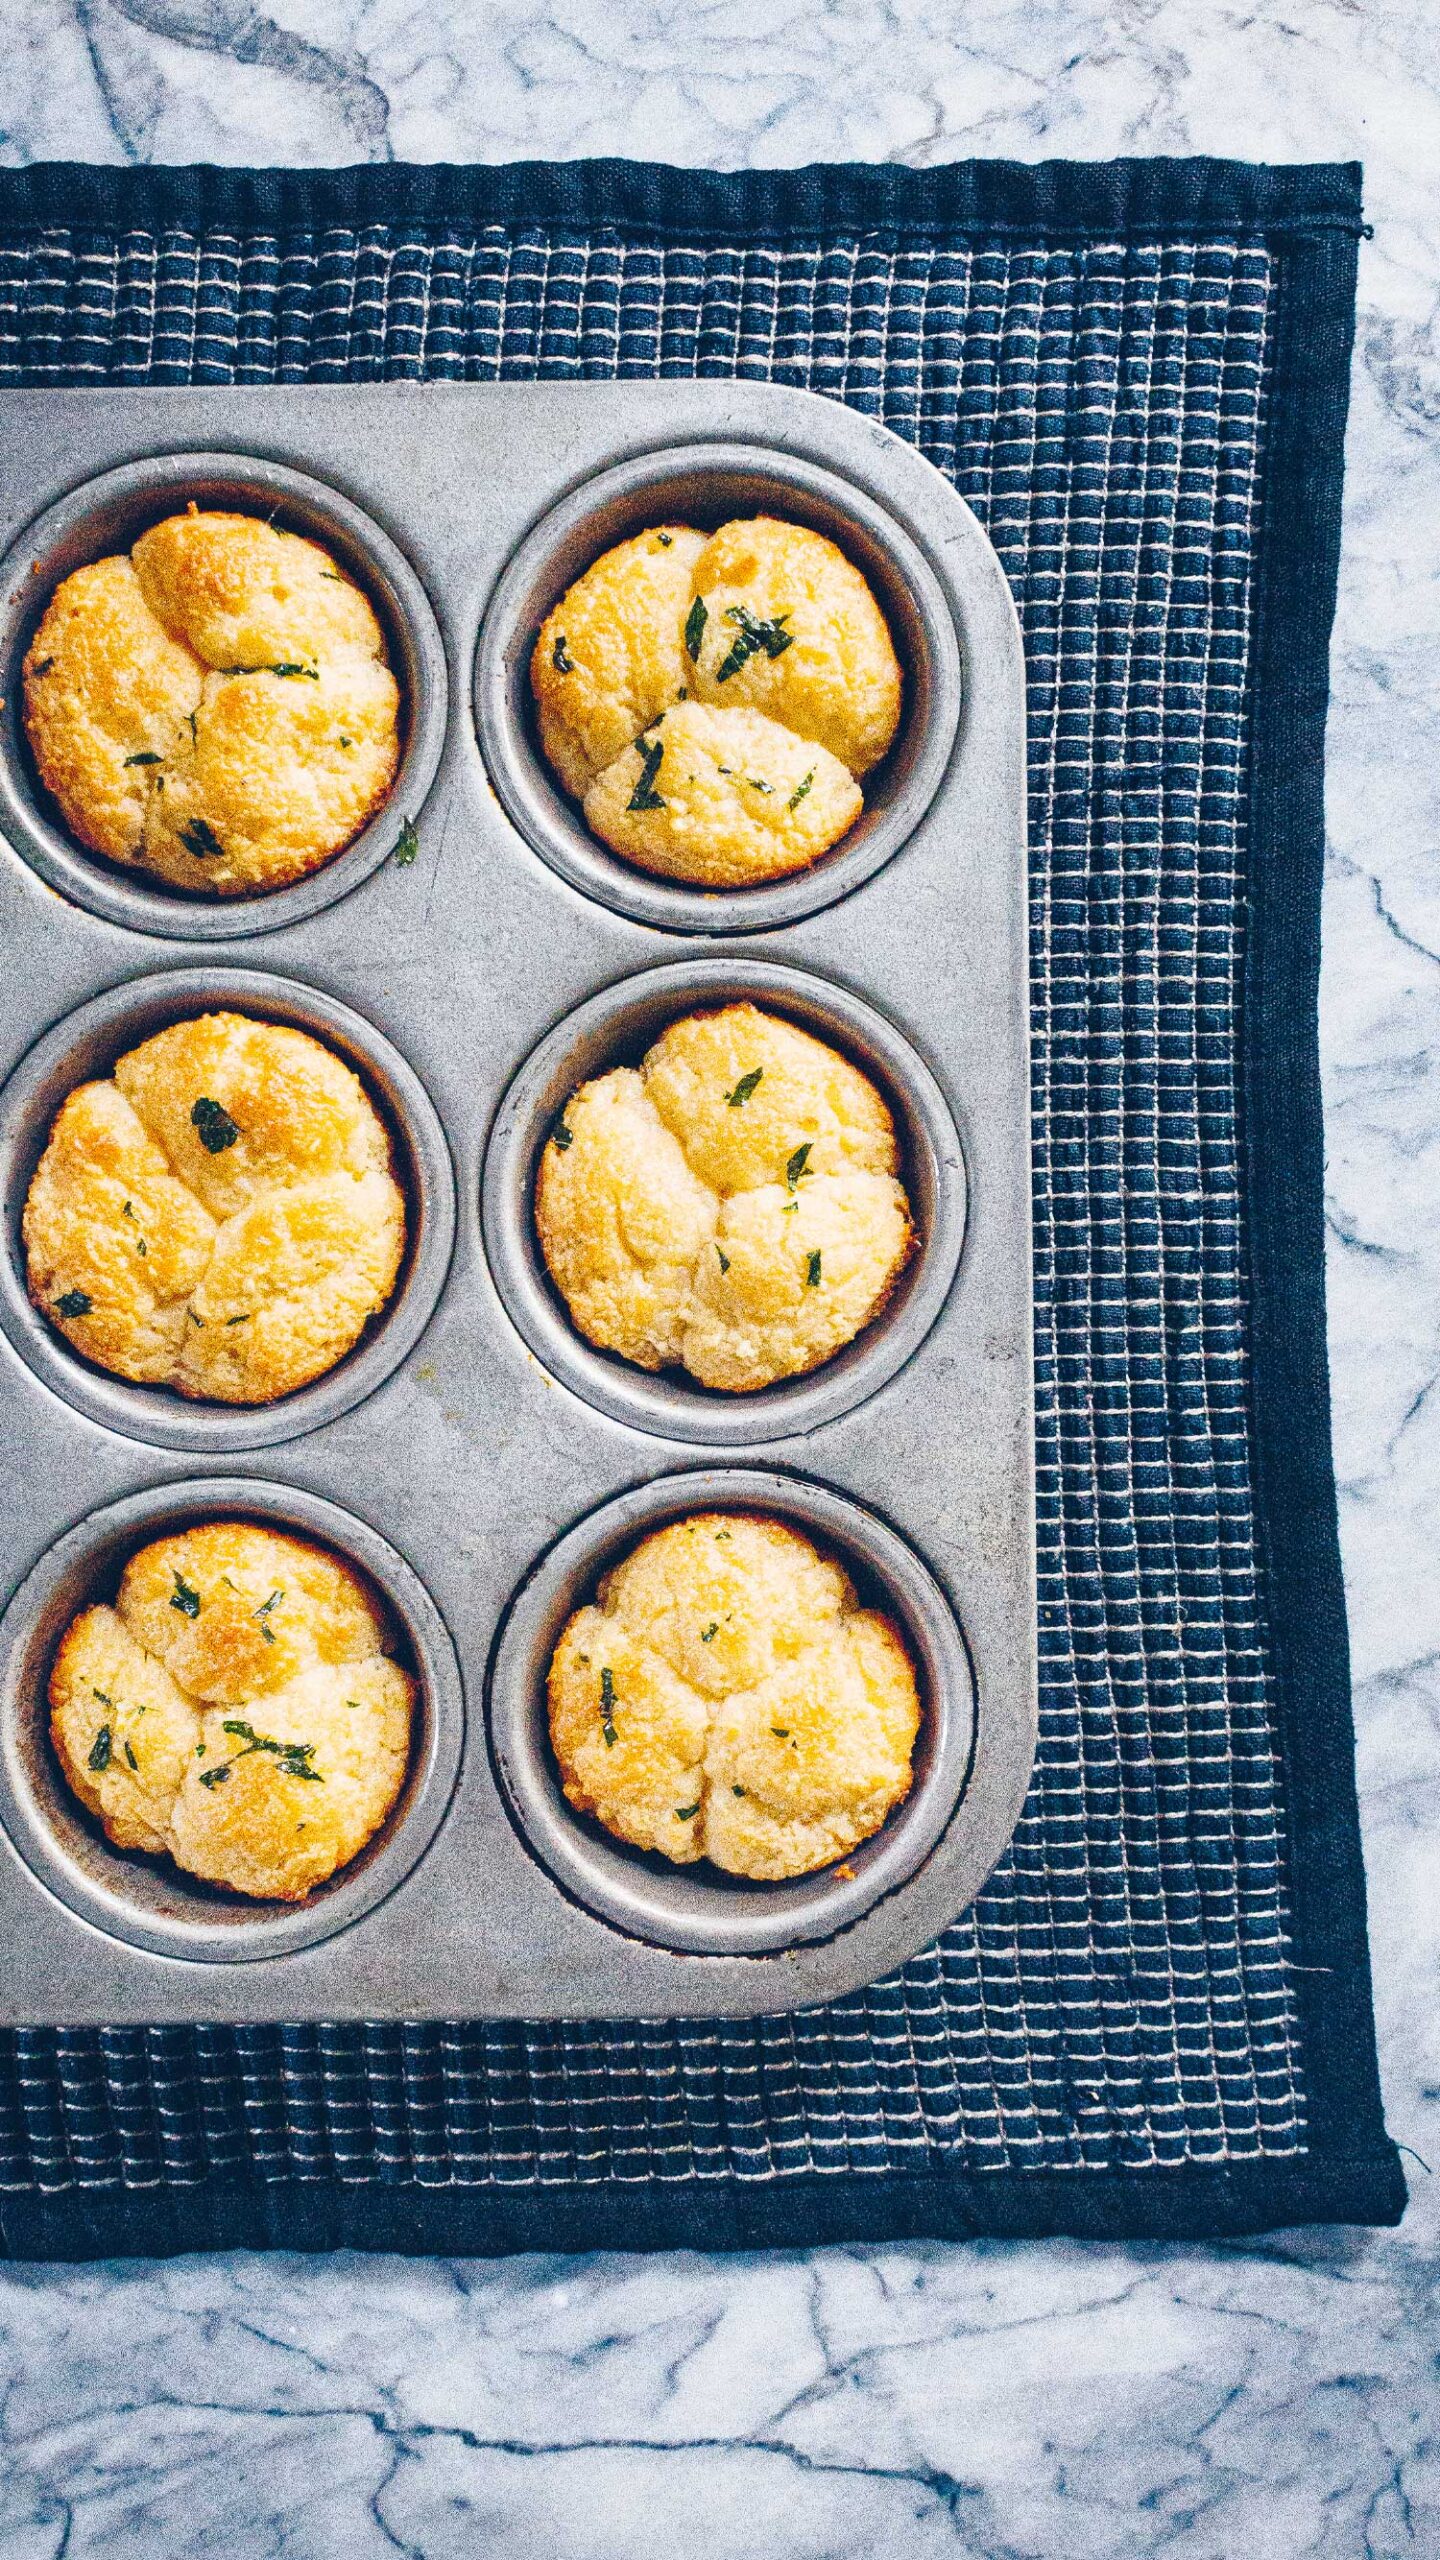 A muffin tin, sitting on a black handwoven placemat on top of a marble countertop, with Cloverleaf rolls fresh from the oven.